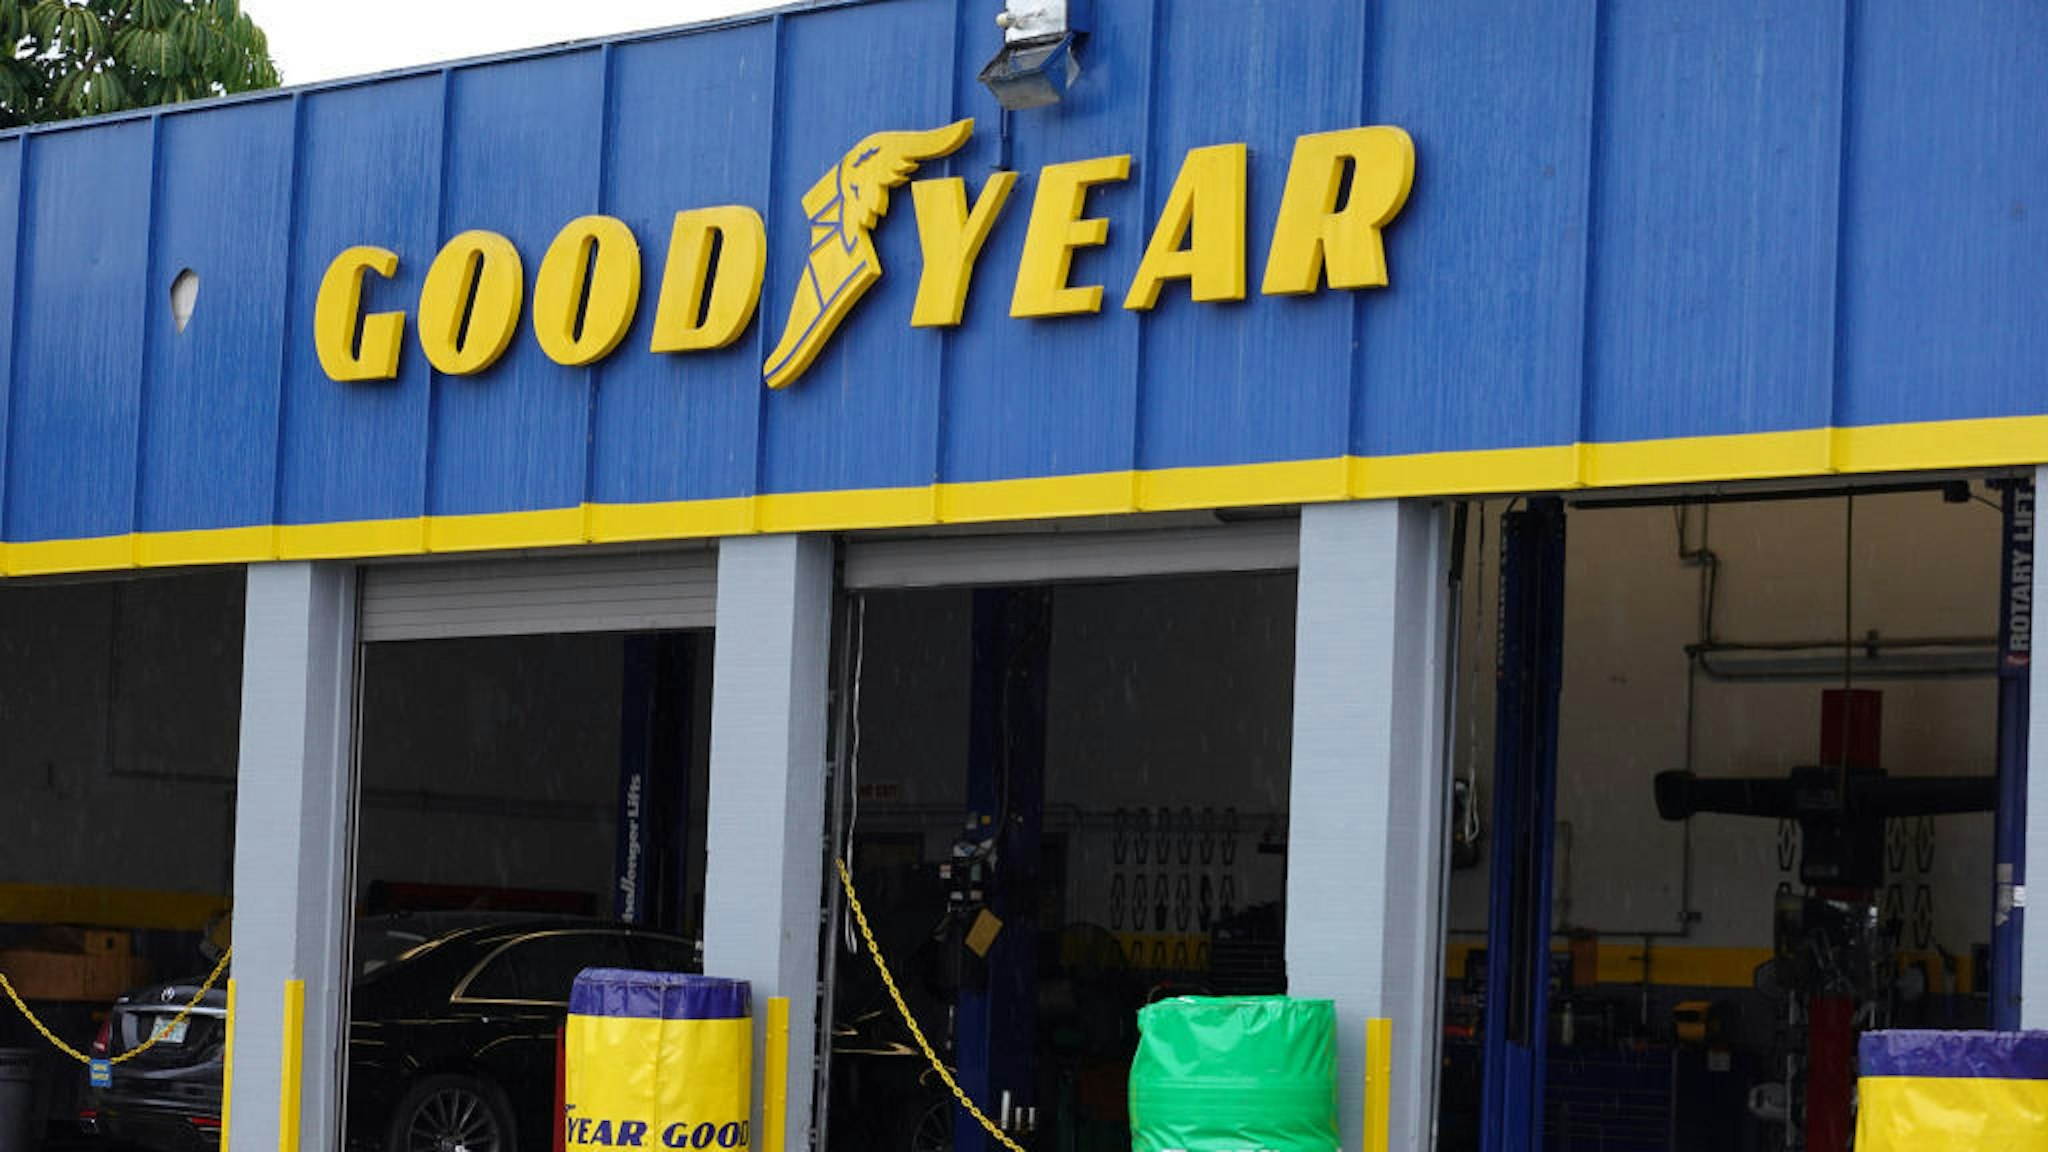 A Goodyear store is seen on August 19, 2020 in Miami, Florida. President Donald Trump called for a boycott against Goodyear in reaction to a social media post that was purportedly from a company training session, that deemed MAGA attire unacceptable for the workplace. In a statement, the Goodyear company denied that the company’s corporate headquarters had anything to do with the post, and said it wasn’t related to any company training session. It said all political campaigning is discouraged in the workplace, and that it supports equality and law enforcement. (Photo by Joe Raedle/Getty Images)